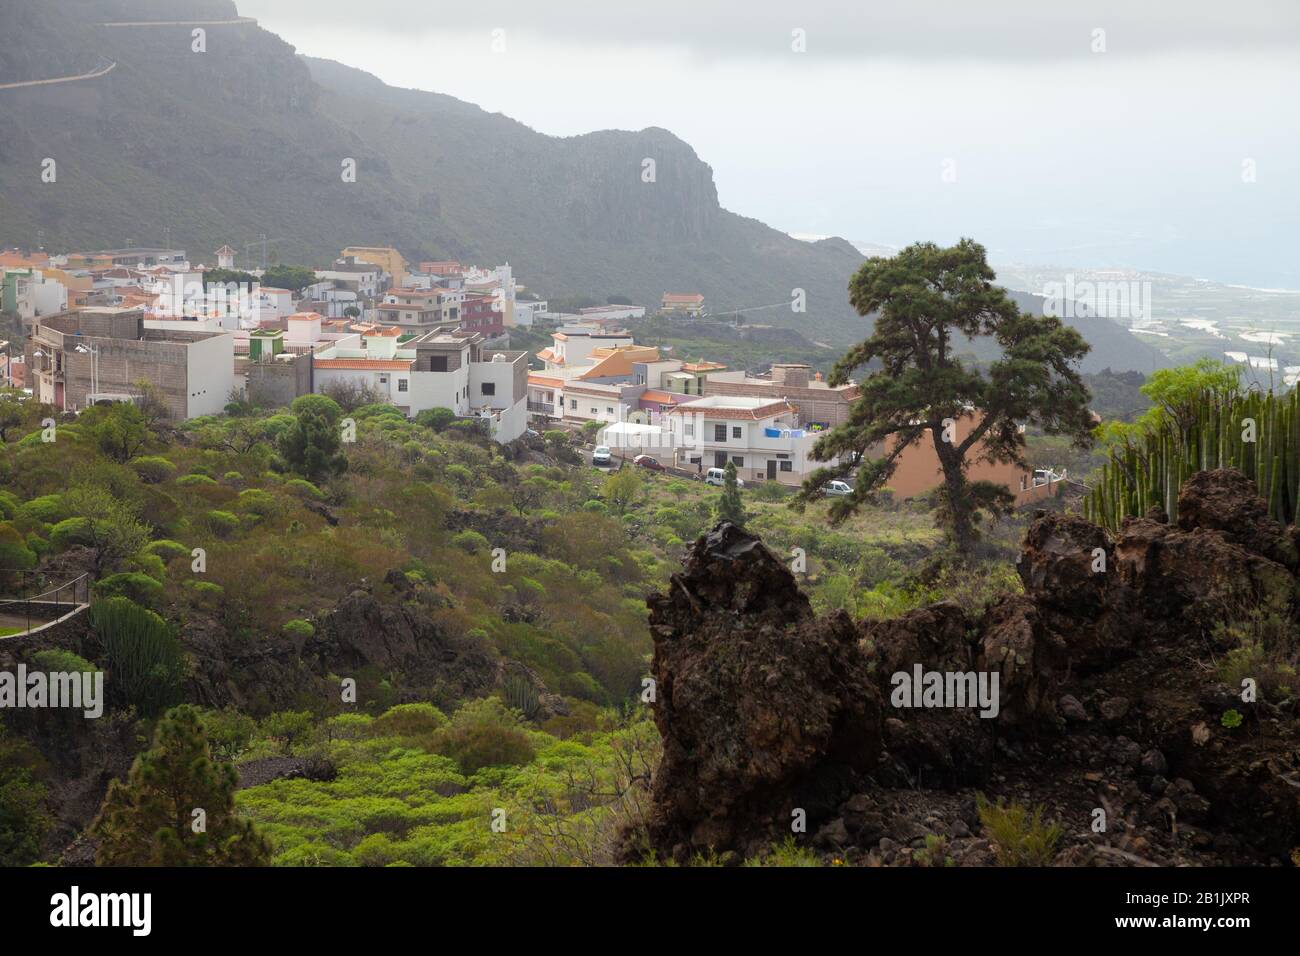 The small village of Tamaimo set in the hillside near Los Gigantes, Tenerife, Spain. Stock Photo